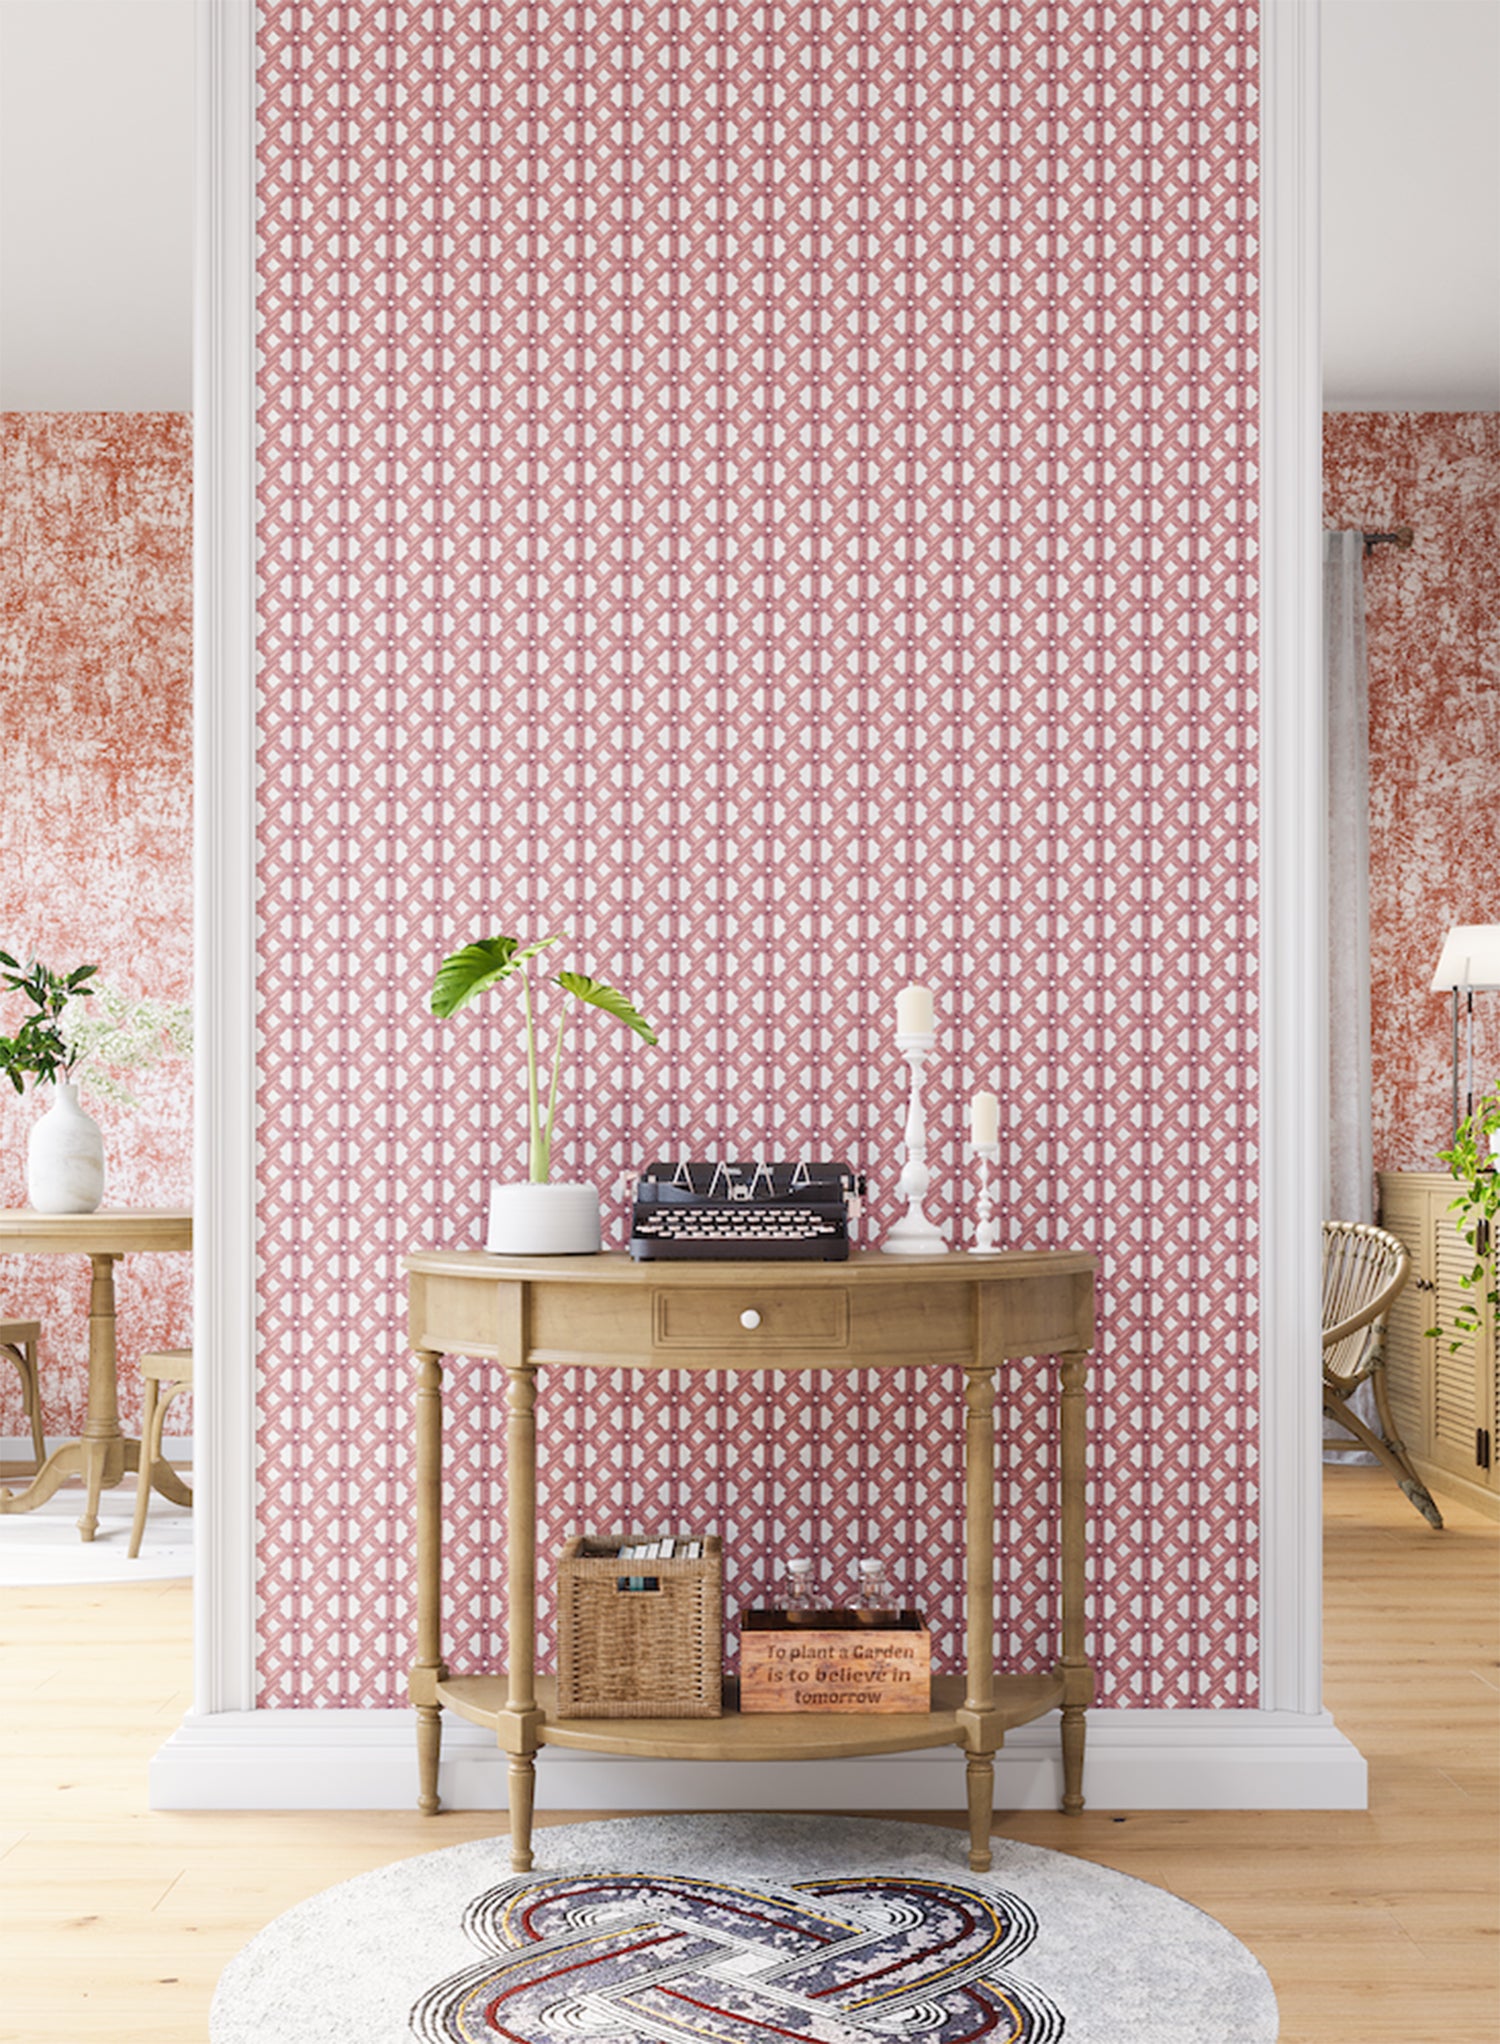 A maximalist living space with an accent wall papered in an intricate lattice print in pink on a cream field.